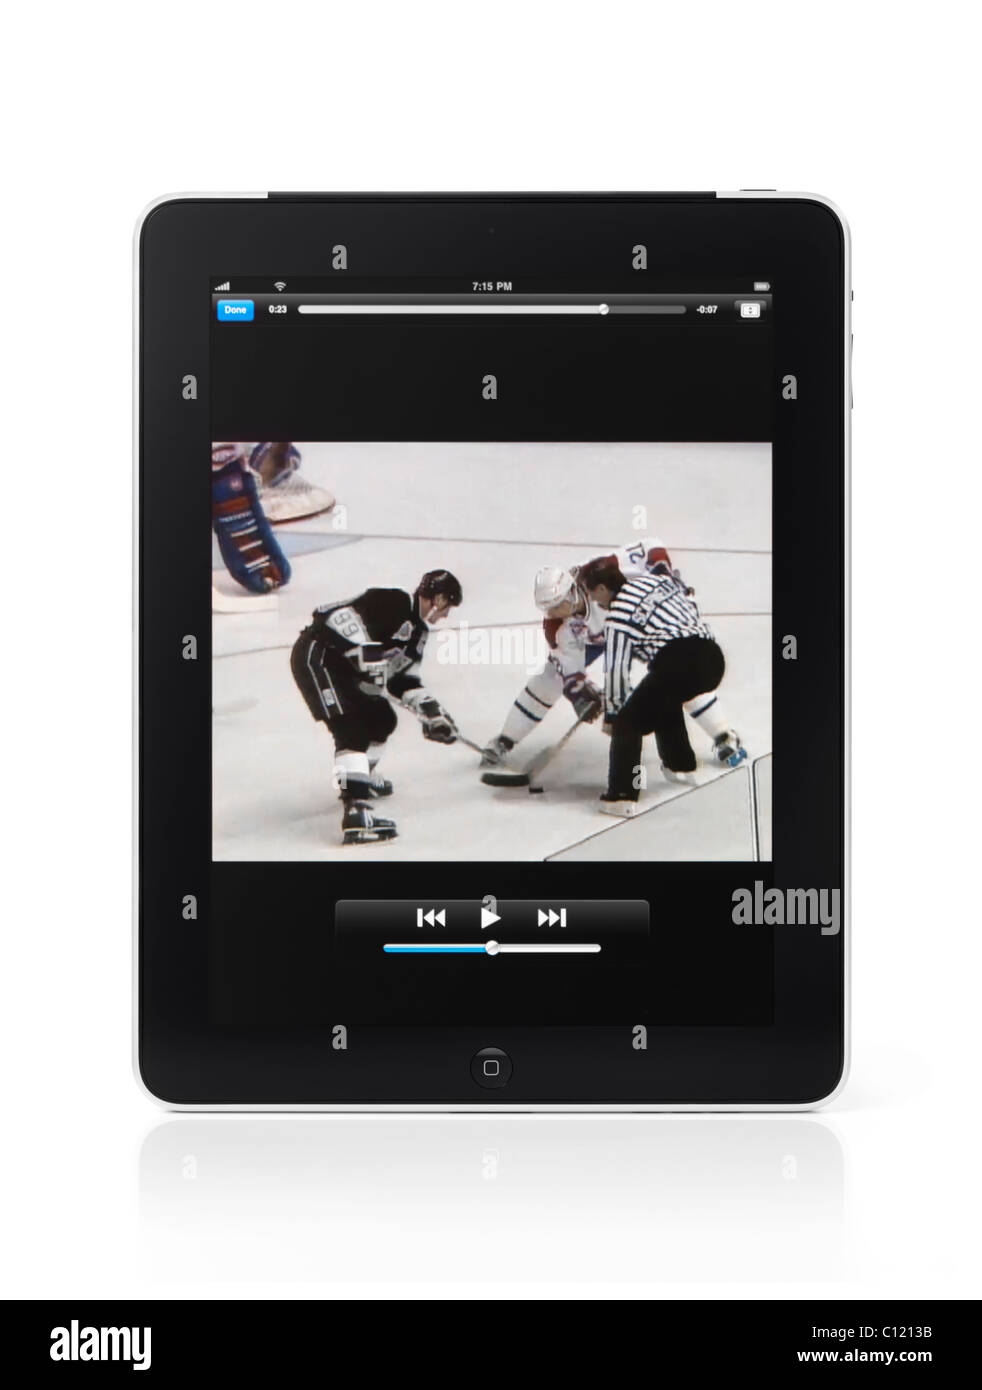 Apple iPad 3G tablet with a hockey match youtube video on its display isolated on white background with clipping path Stock Photo